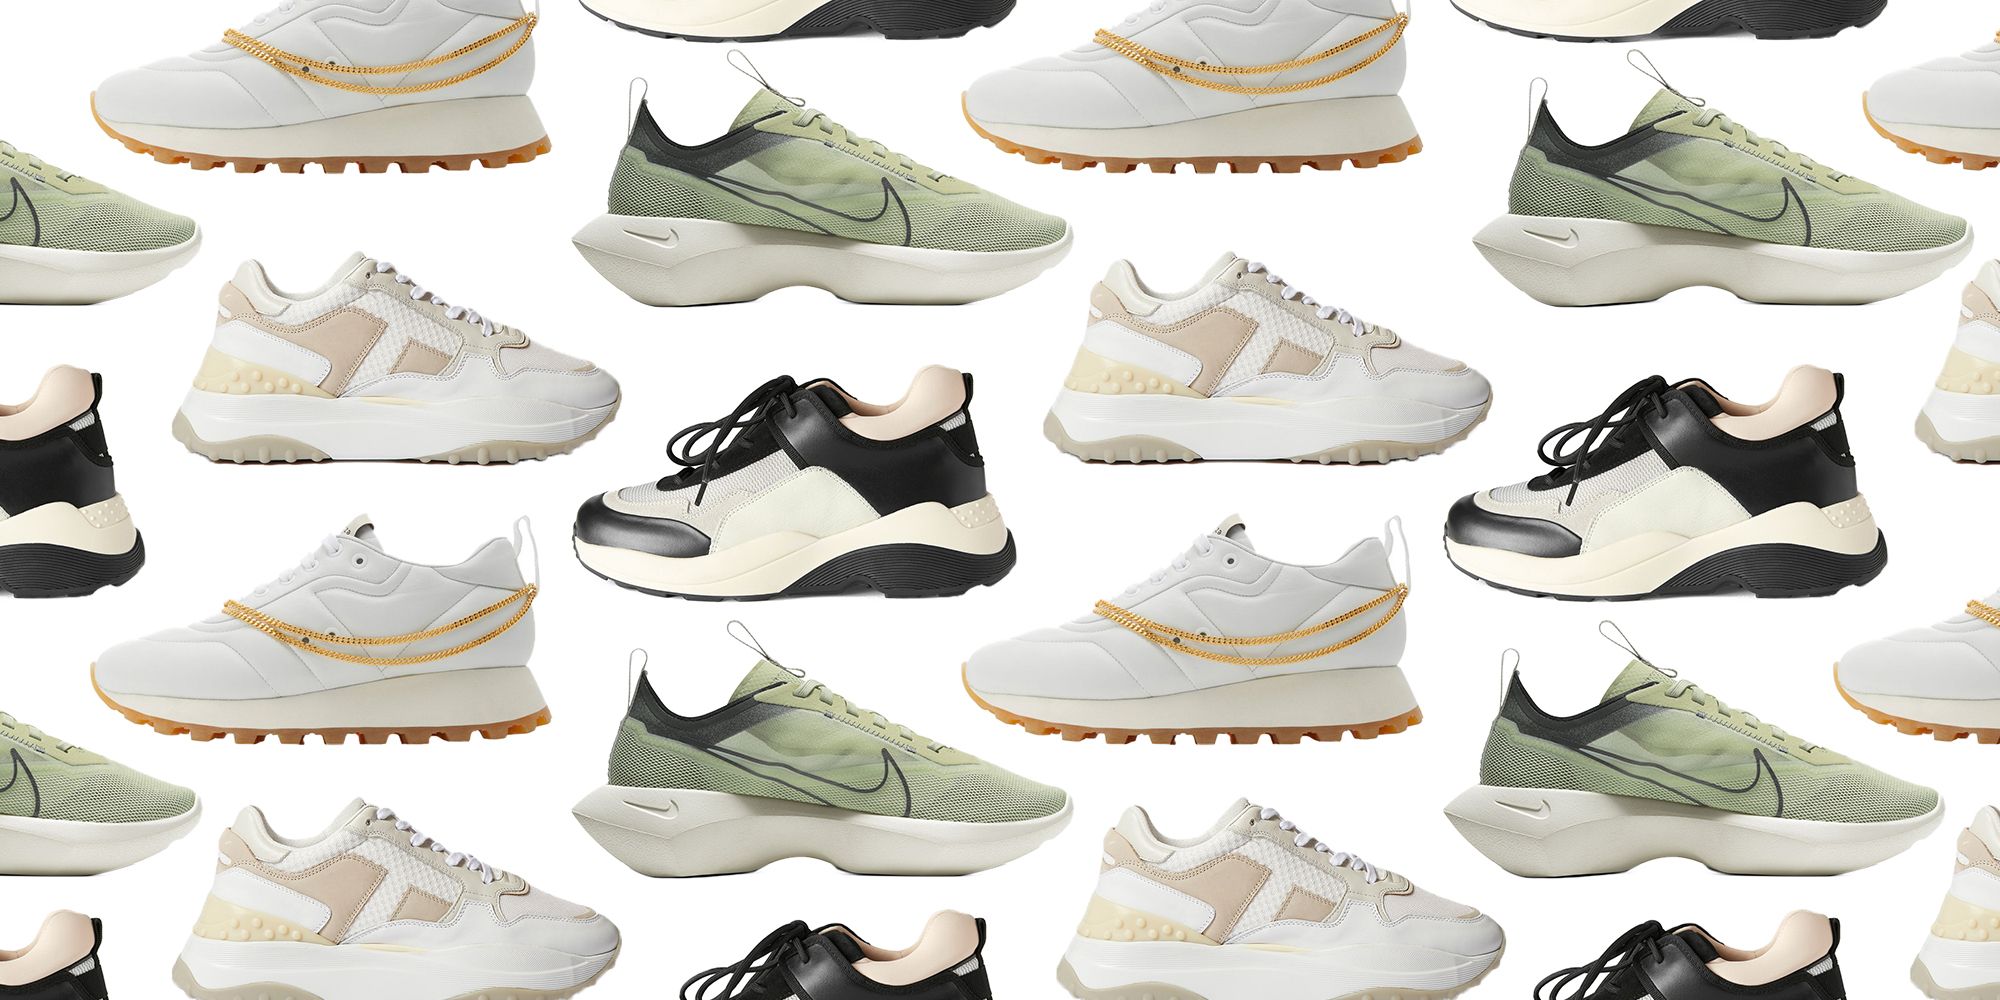 trendy gym shoes 2019